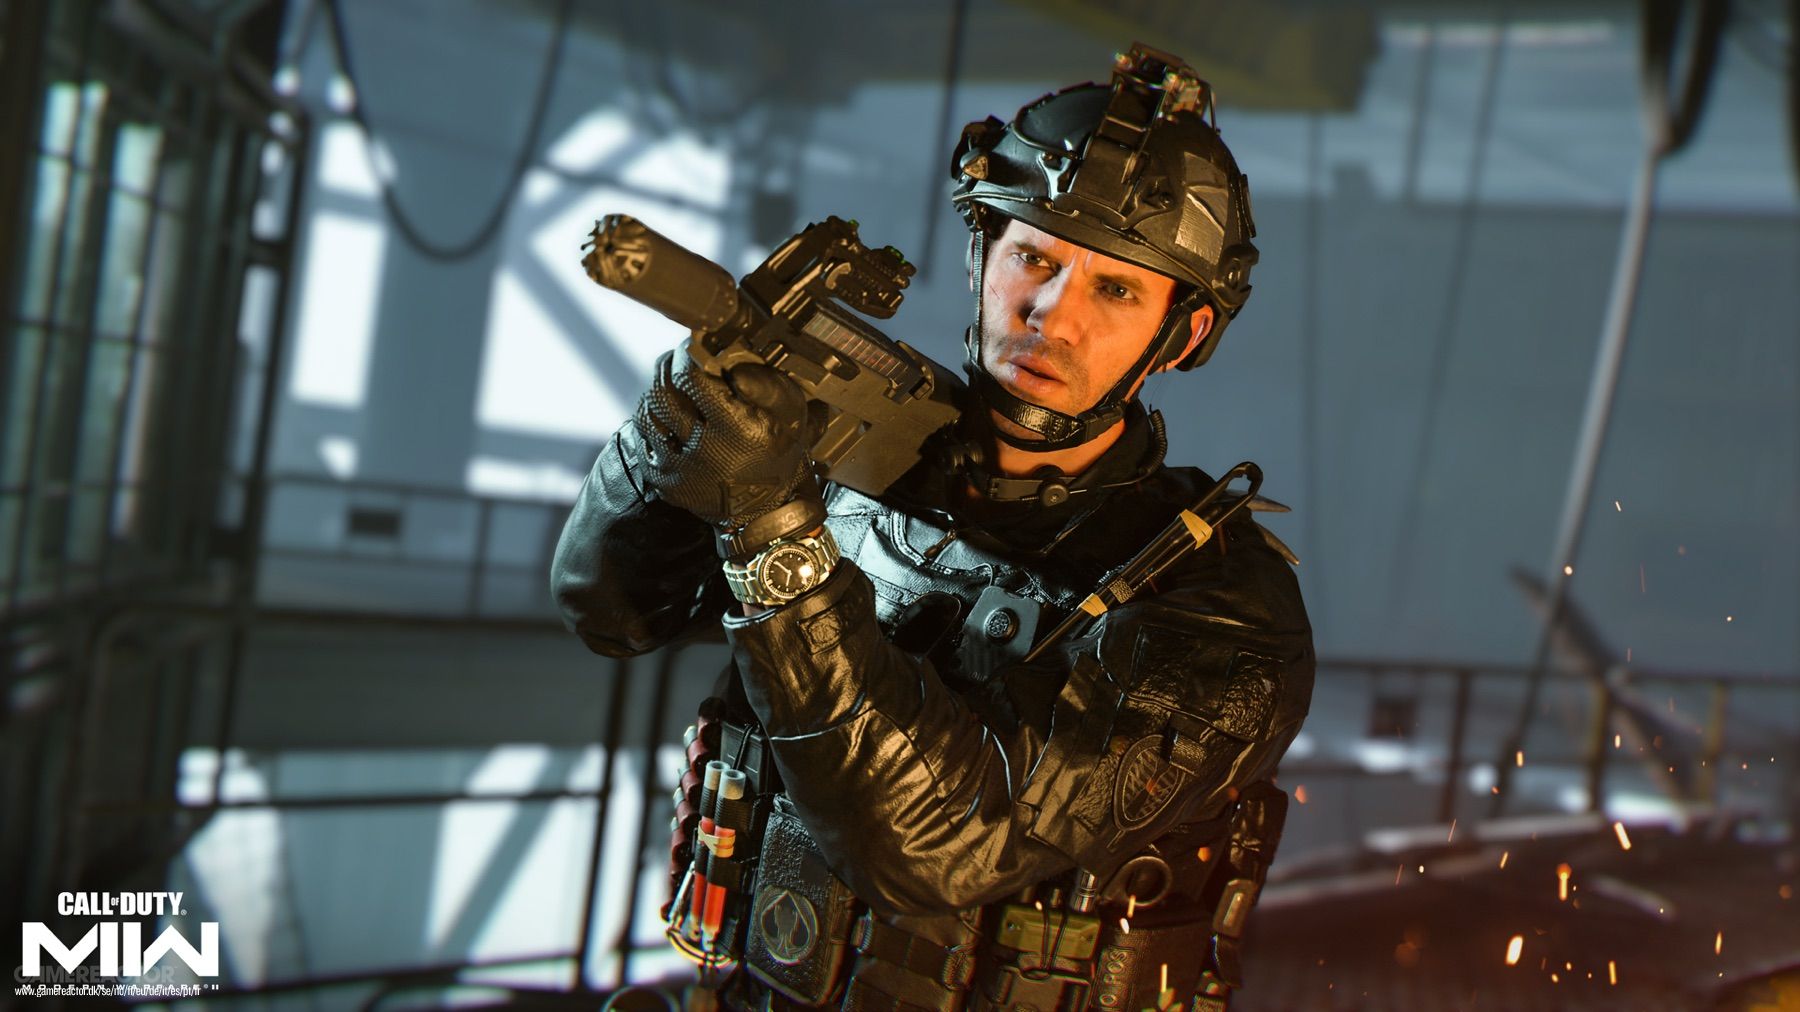 Microsoft also wants Call of Duty on PlayStation 6